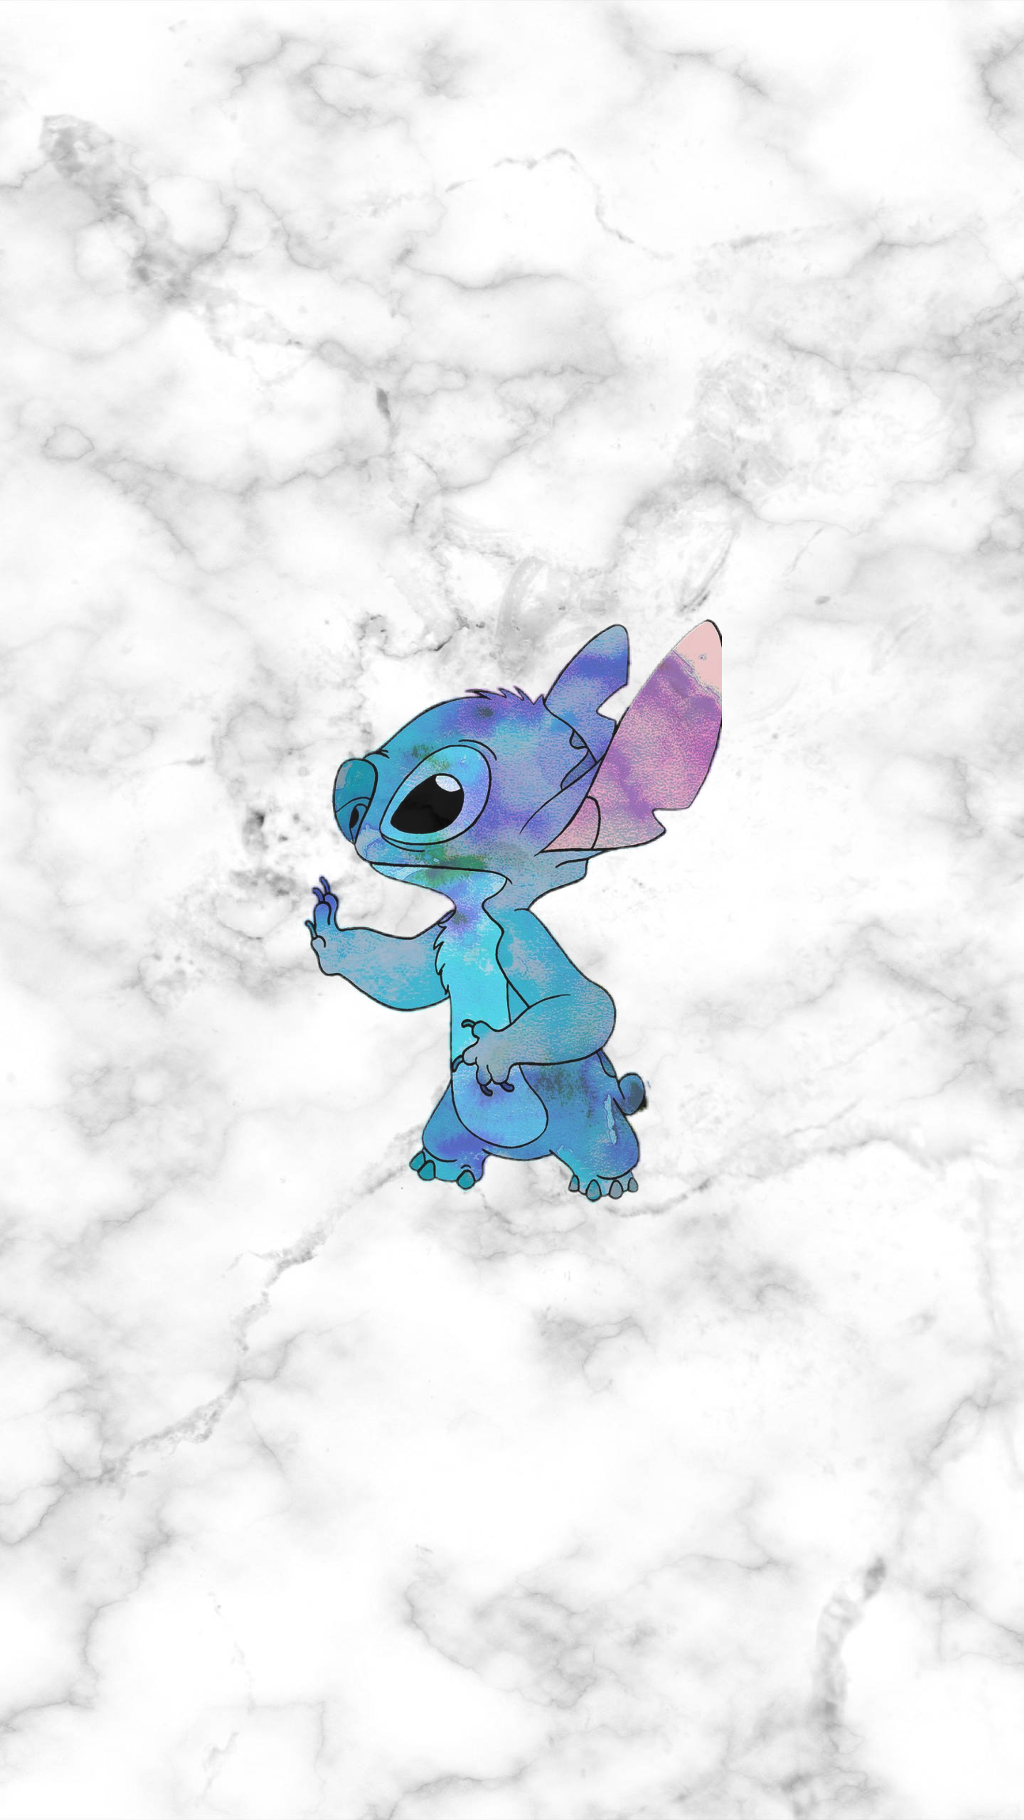 Aesthetic Stitch Cartoon Wallpapers Wallpaper Cave